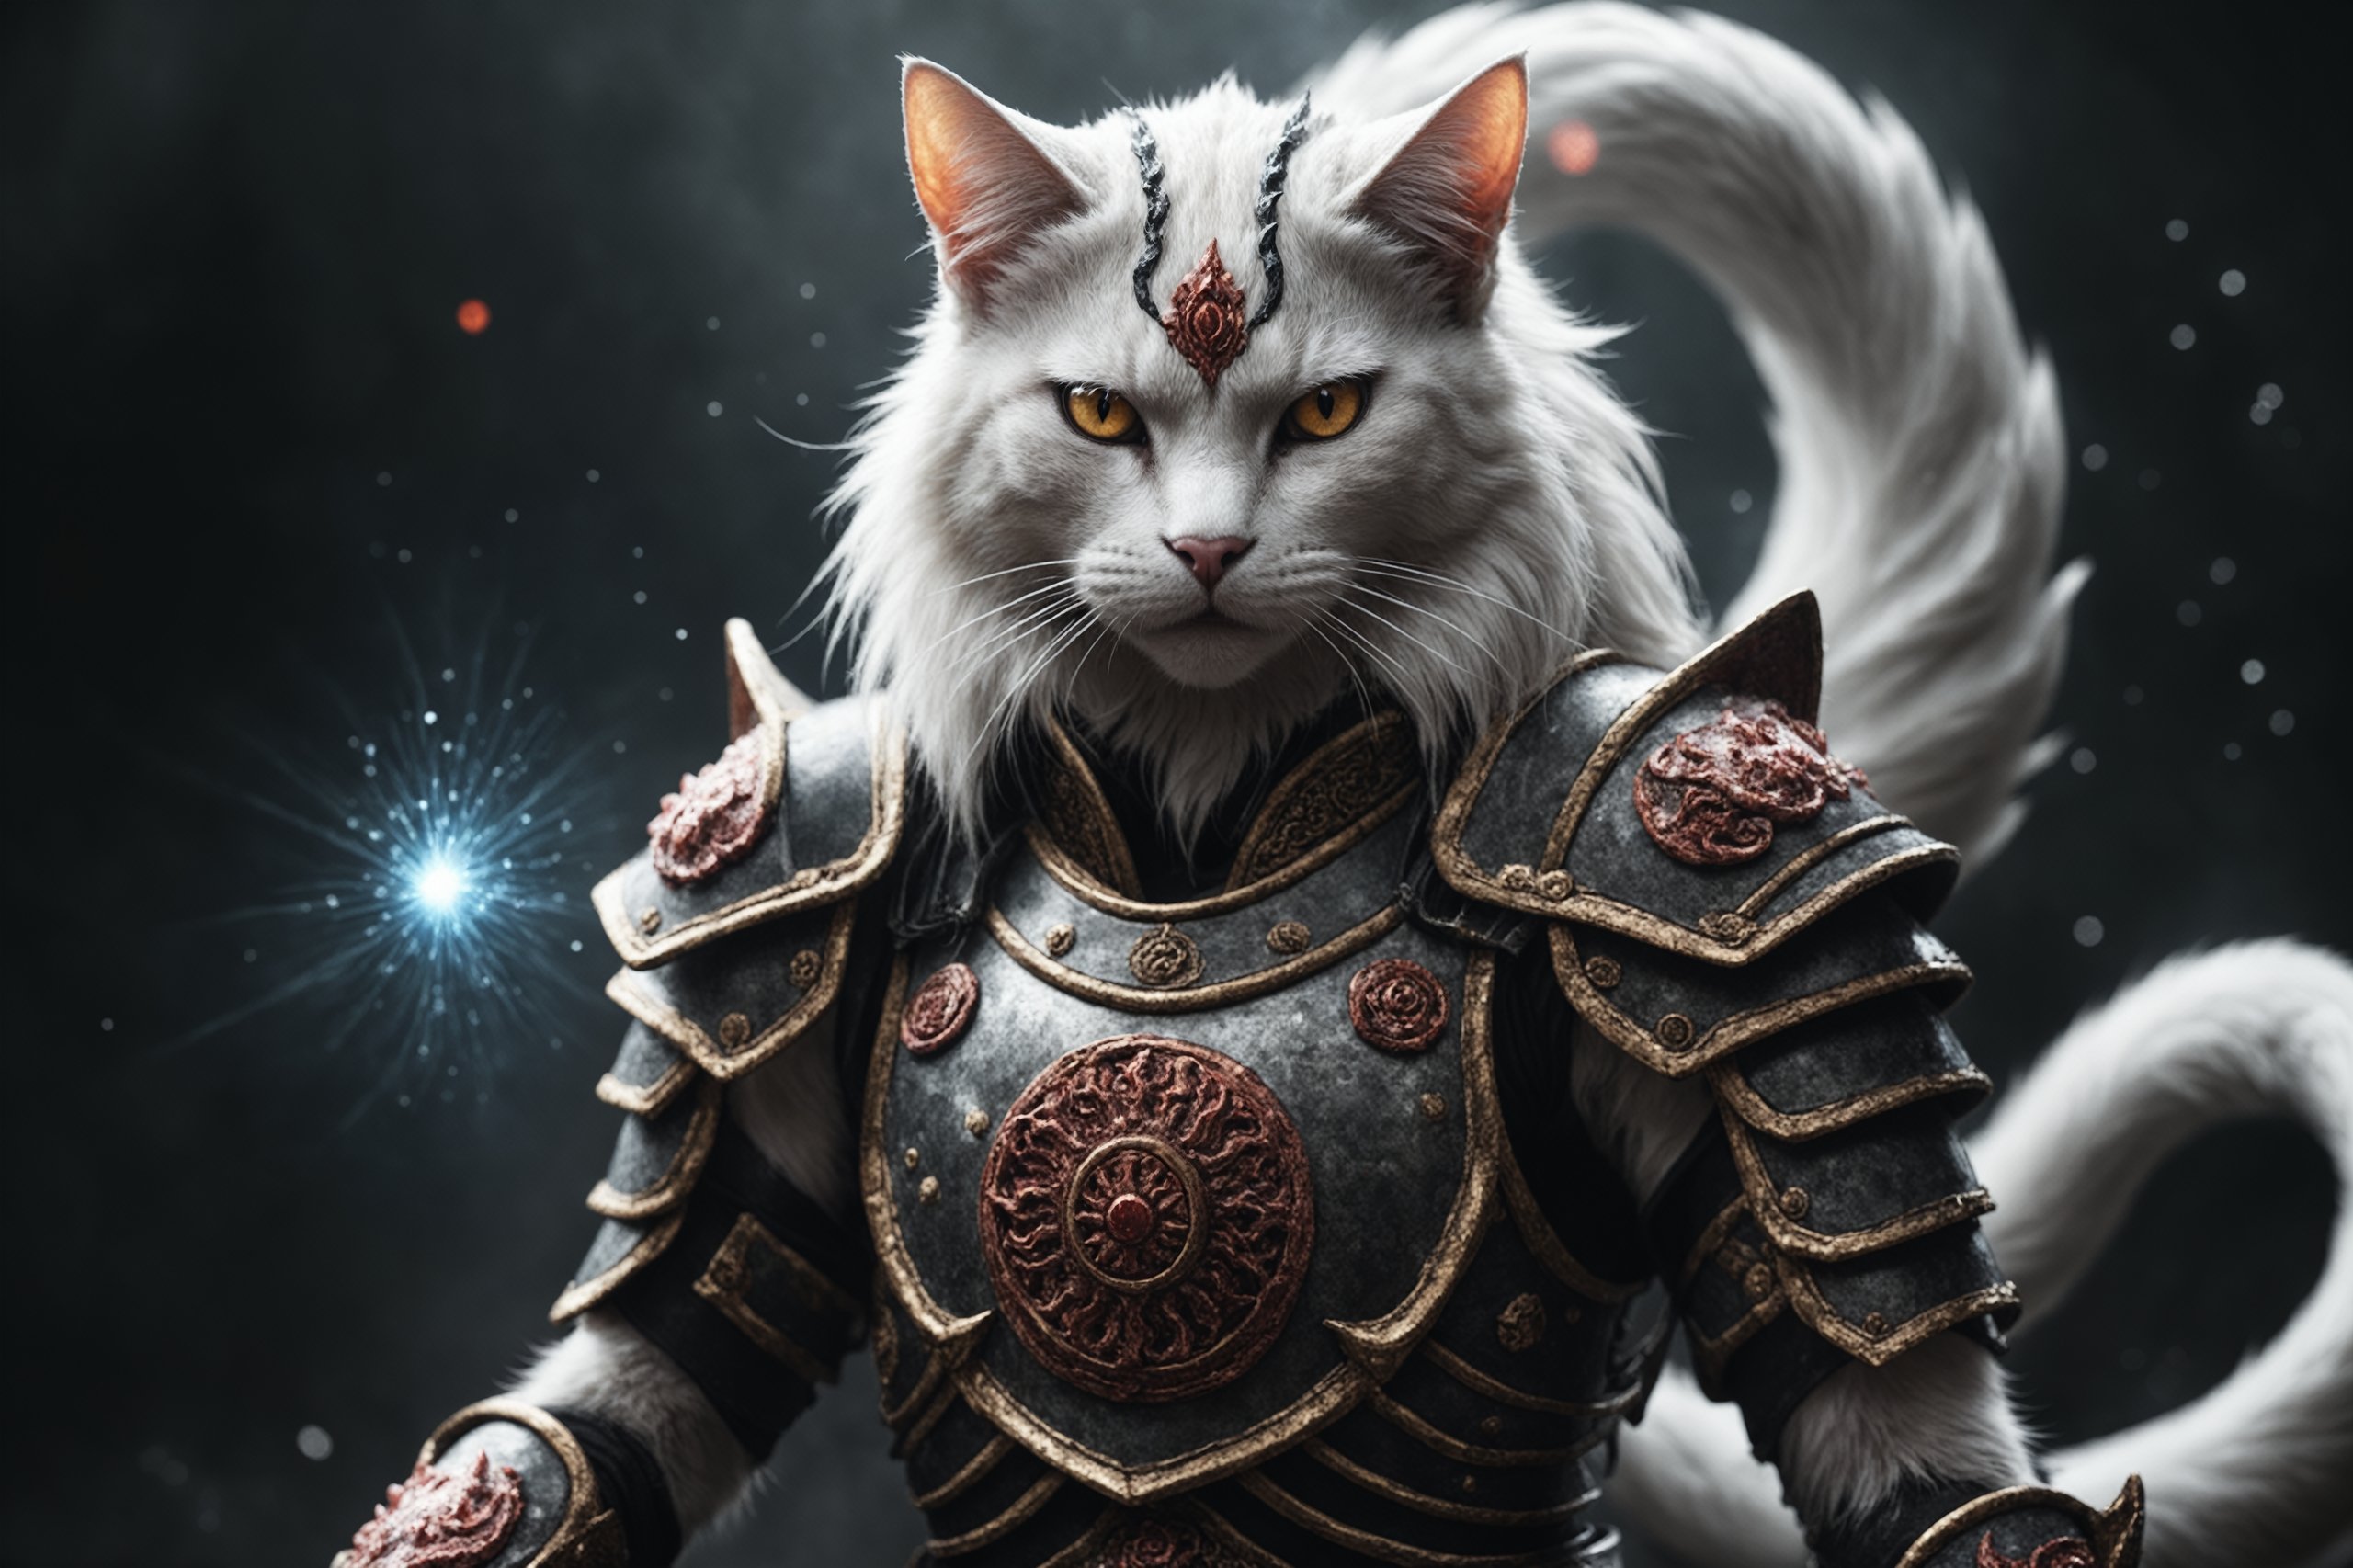 photo, a cat demon, asian_mythology, seven tailed, wearing armor, epic, dark atmosphere, magic particles 